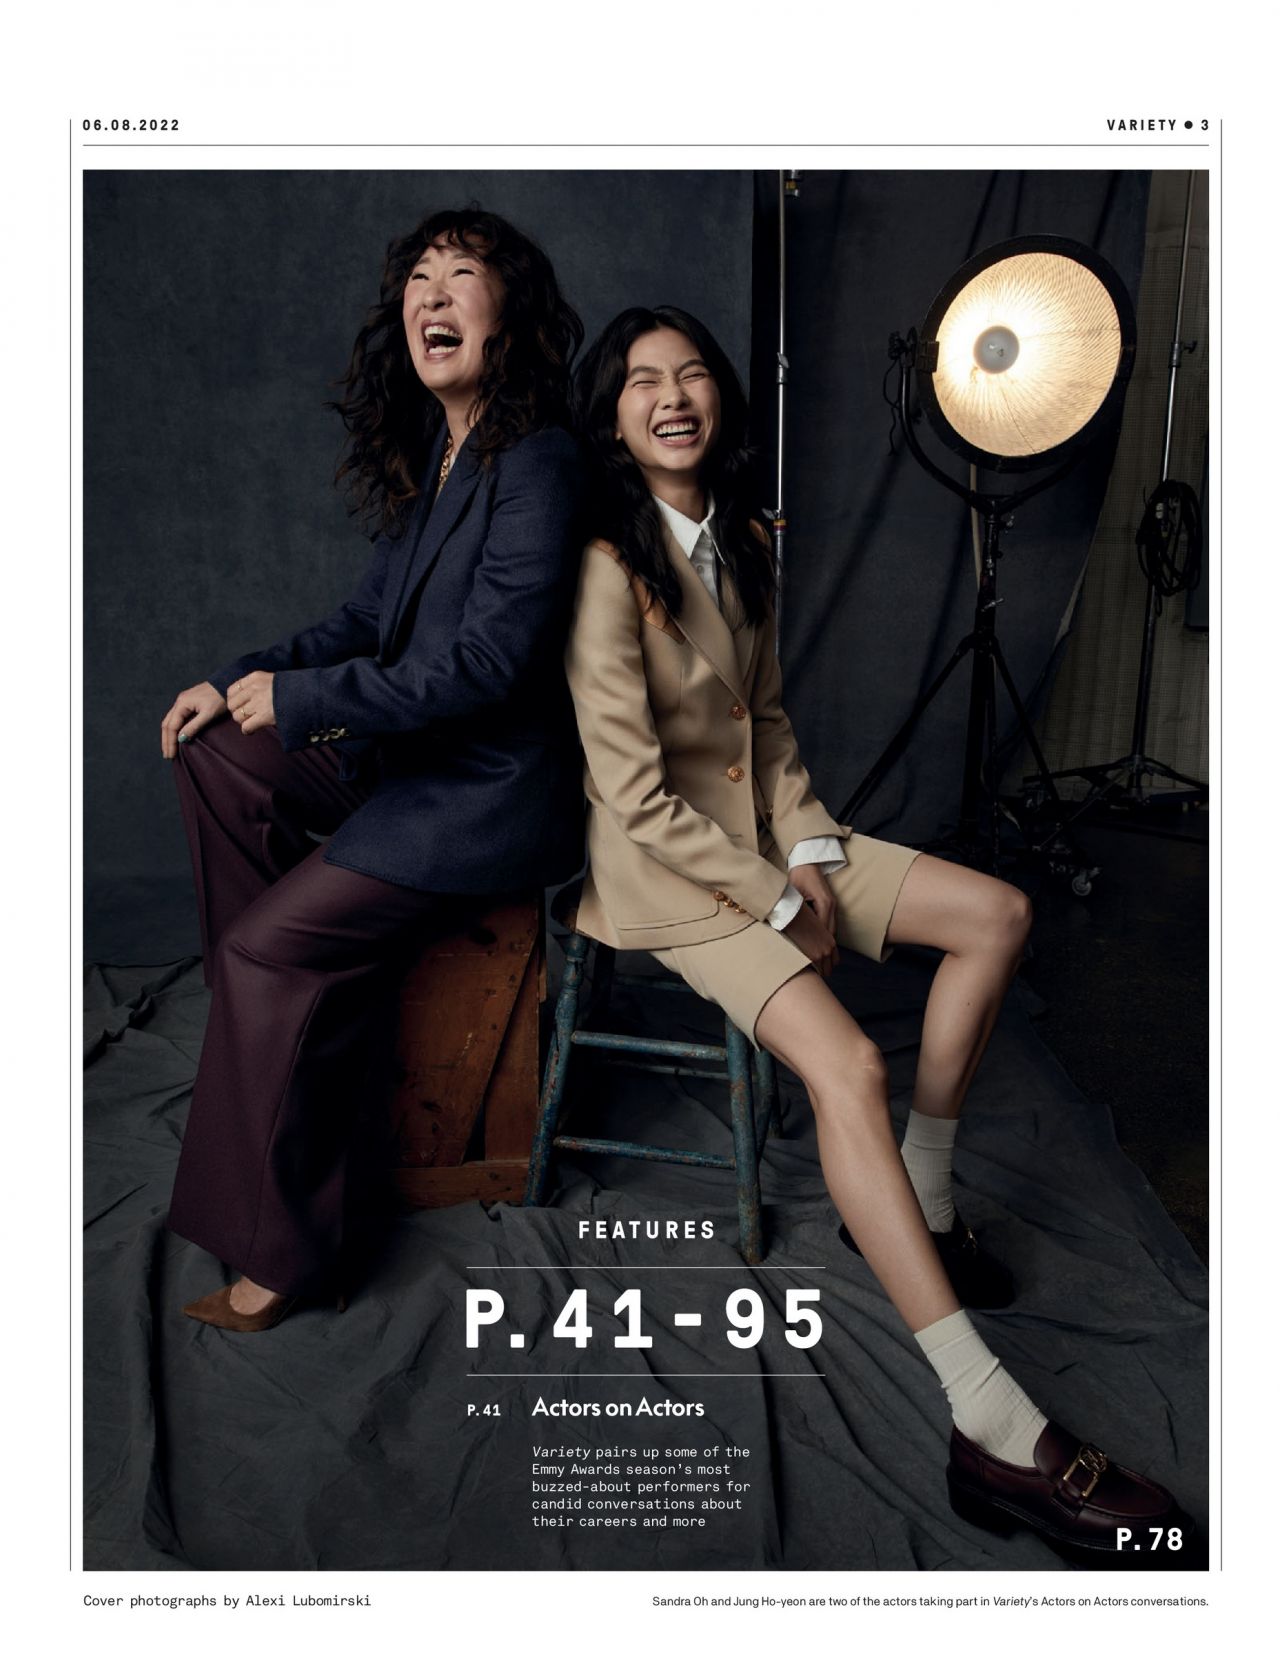 BRANDS' NEW OBSESSION: HOYEON JUNG - Dryclean Only Magazine